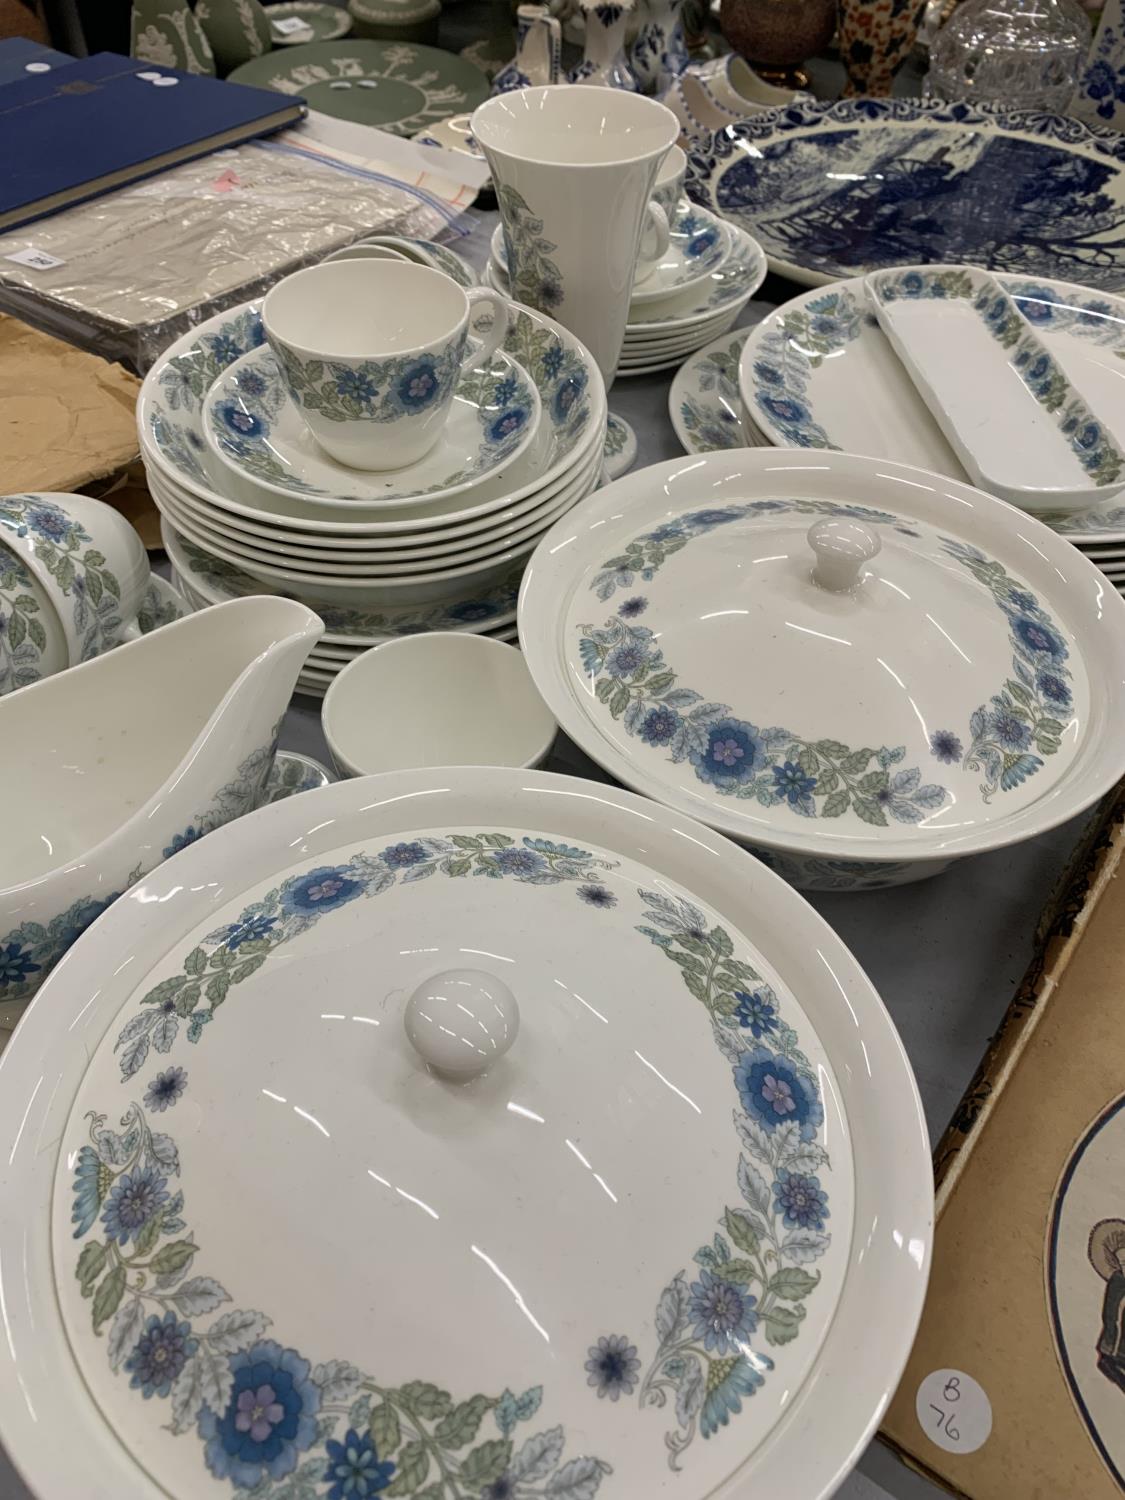 A WEDGWOOD 'CLEMENTINE' PART DINNER SERVICE TO INCLUDE PLATES, BOWLS, SERVING TUREENS, SAUCE BOAT - Image 6 of 7